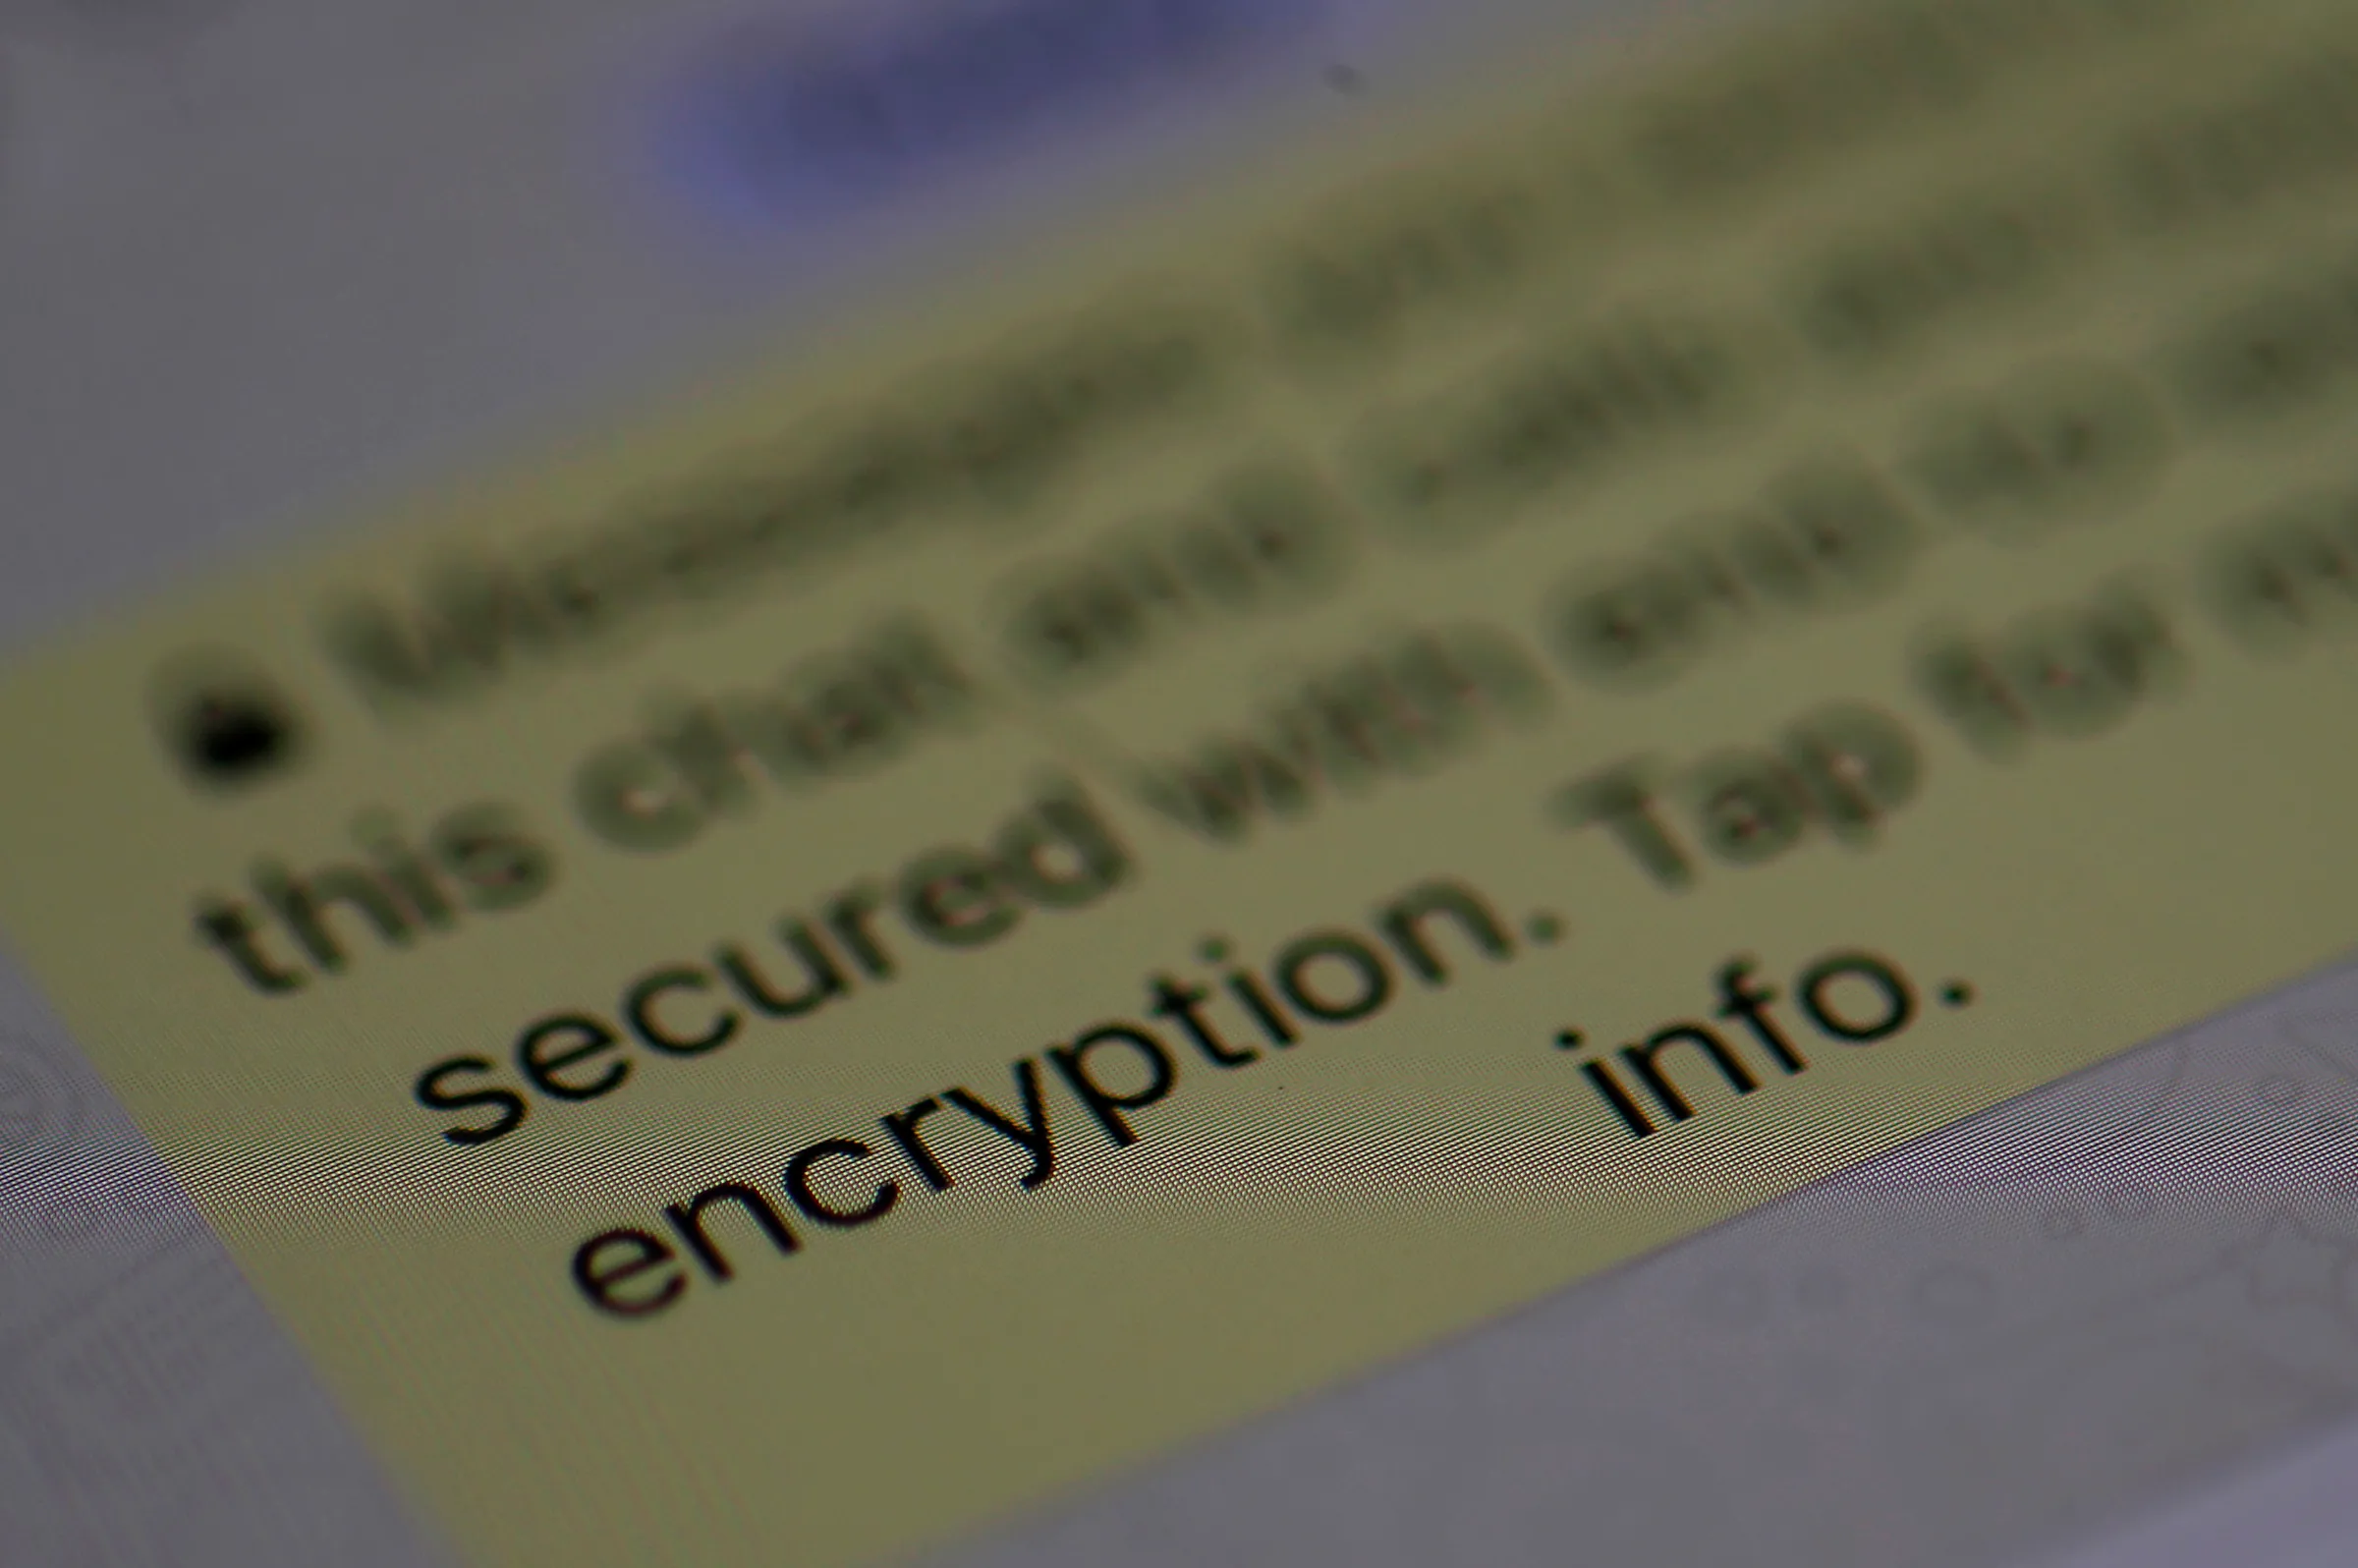 An encryption message is seen on the WhatsApp application on an iPhone in Manchester, Britain March 27, 2017